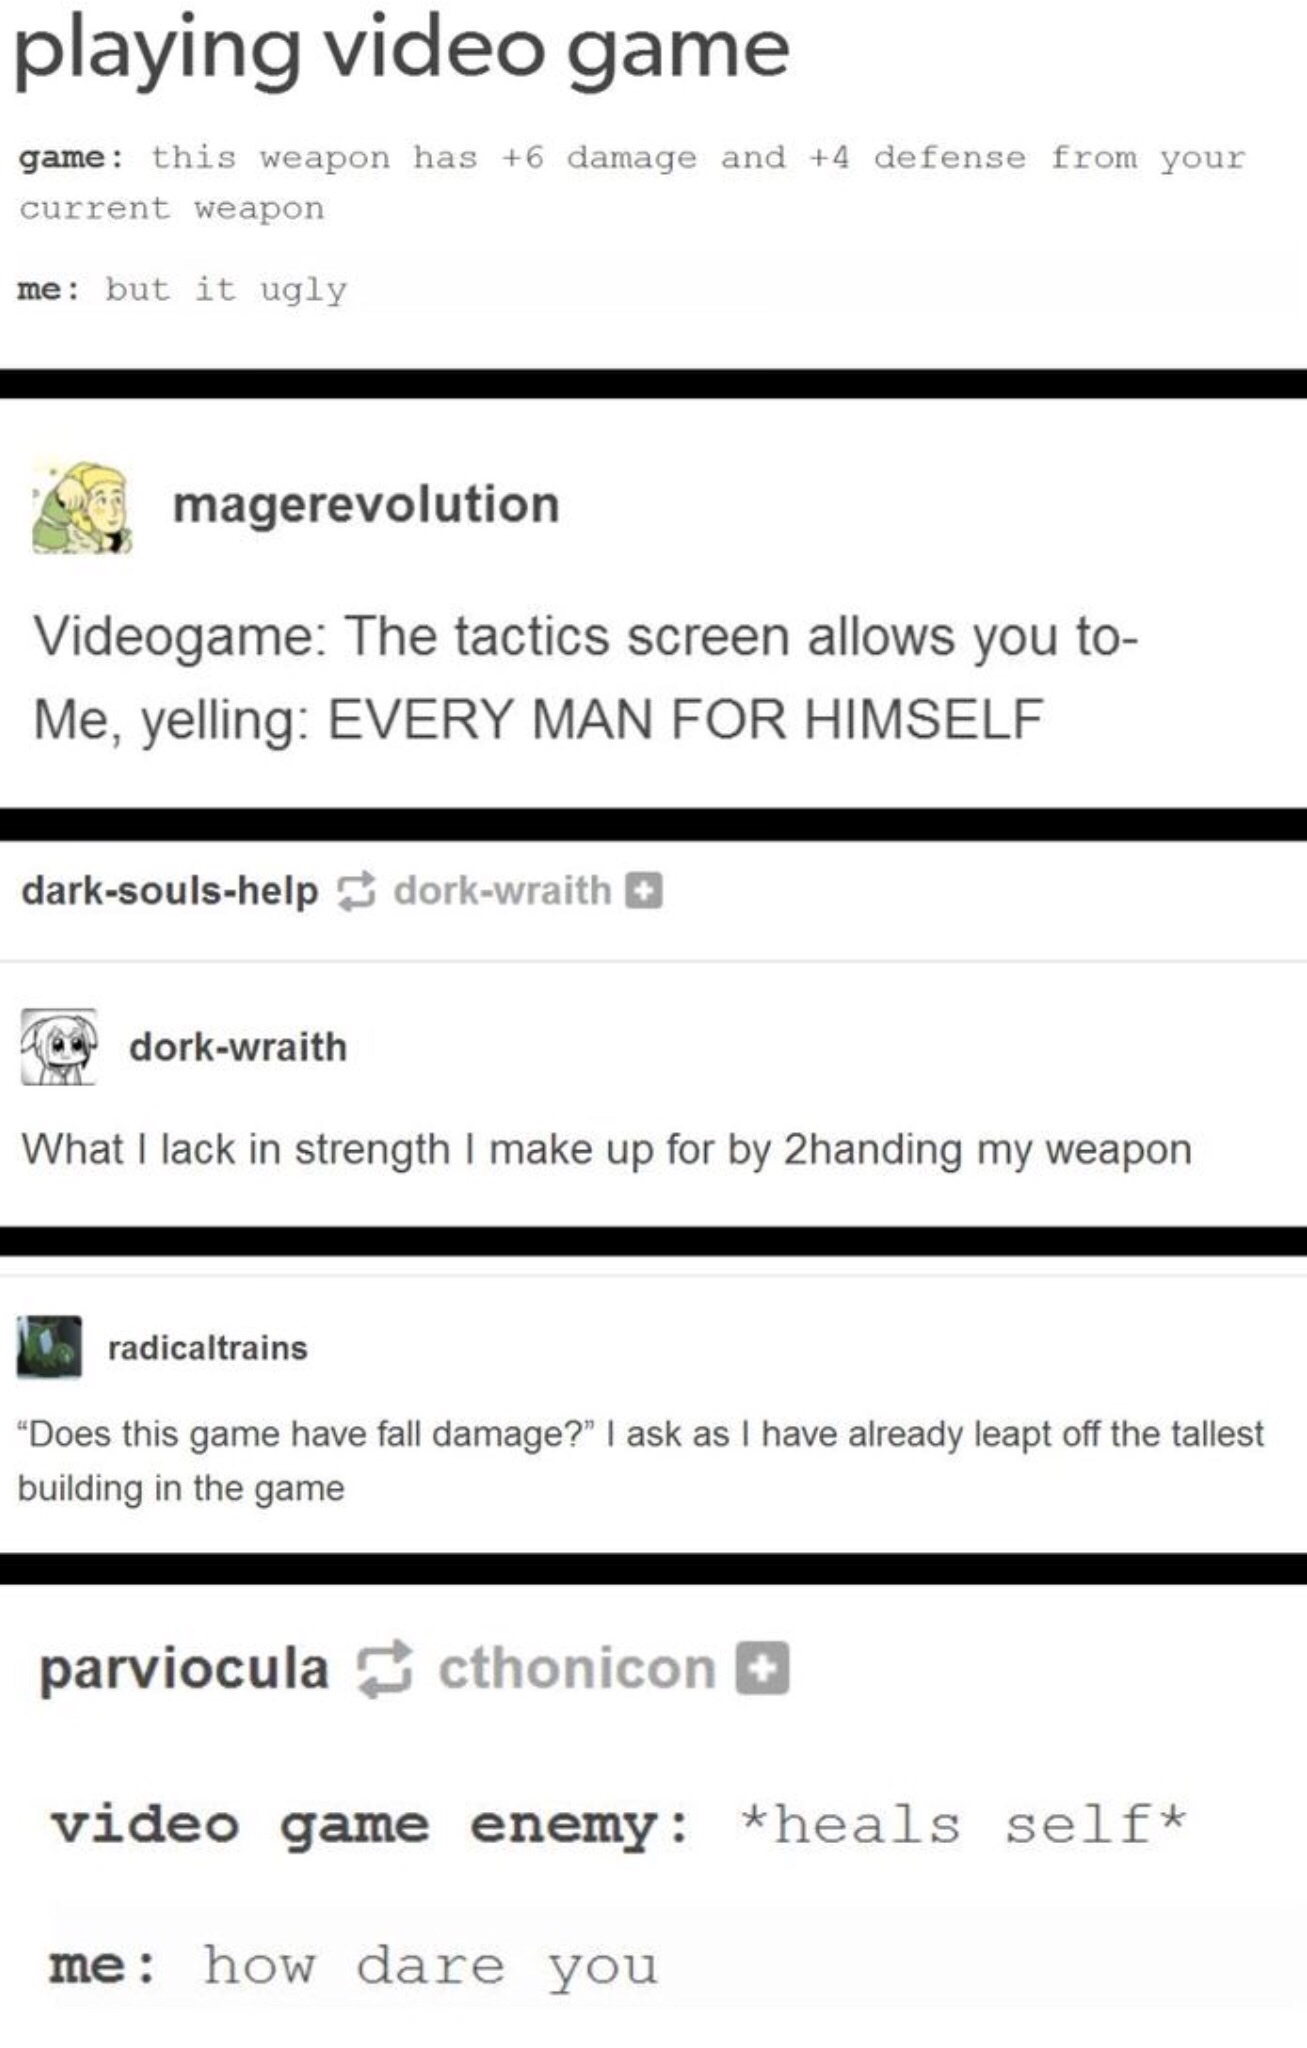 document - playing video game game this weapon has 6 damage and 4 defense from your current weapon me but it ugly magerevolution Videogame The tactics screen allows you to Me, yelling Every Man For Himself darksoulshelp dorkwraith dorkwraith What I lack i